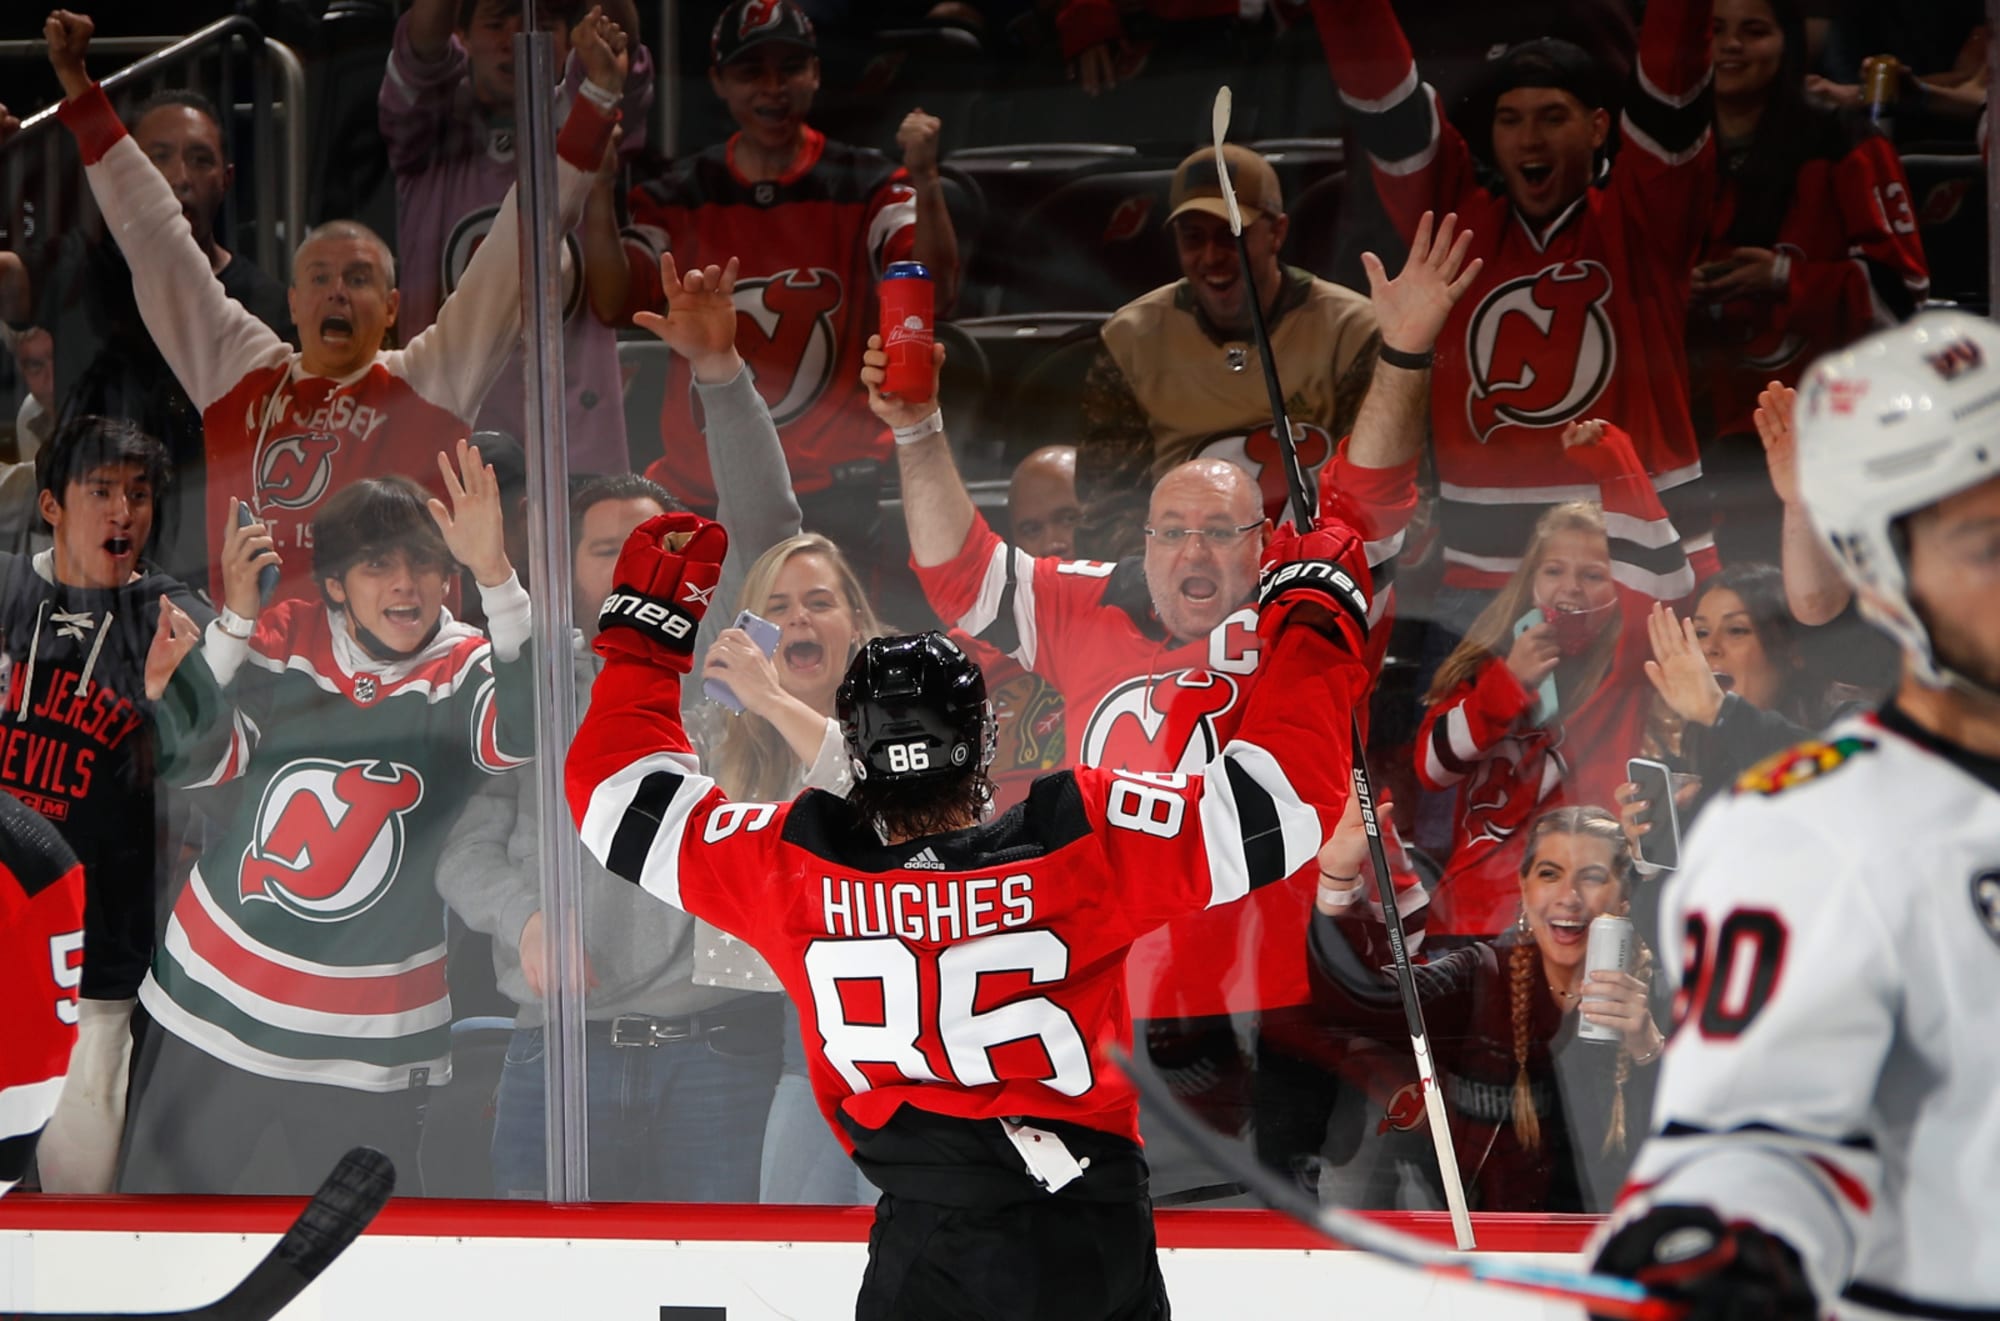 Jack Hughes has Officially Reached Superstar Status With The Devils